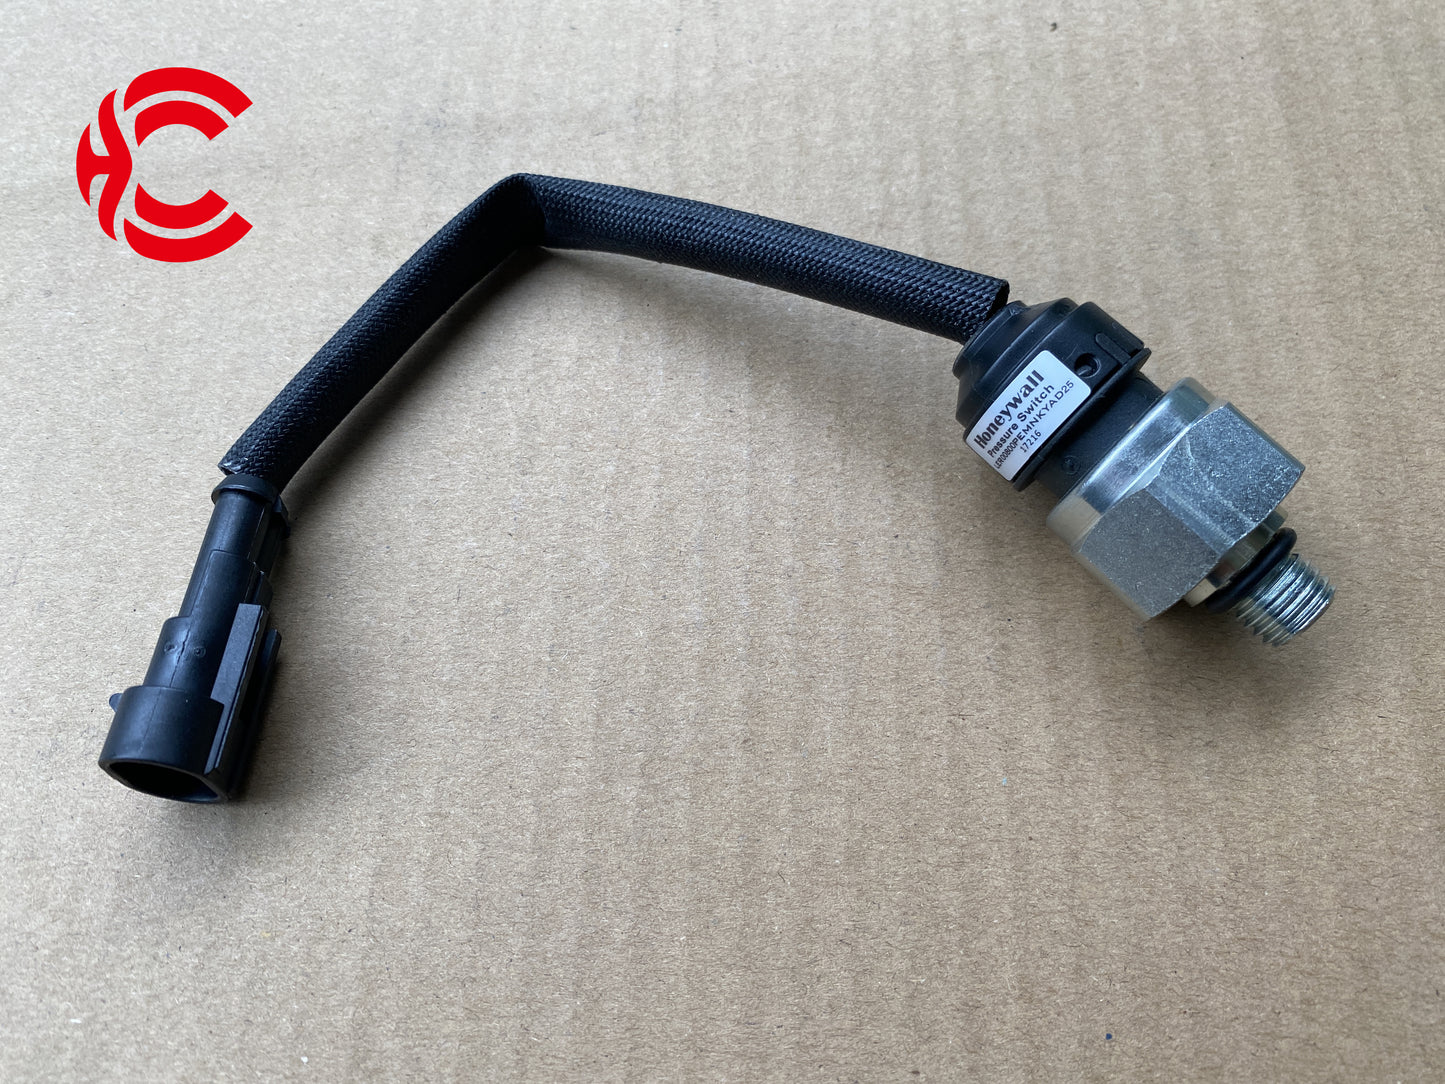 OEM: 3507-00077 M12*1.5 NCMaterial: ABS metalColor: black silverOrigin: Made in ChinaWeight: 100gPacking List: 1* Brake Light Switch More ServiceWe can provide OEM Manufacturing serviceWe can Be your one-step solution for Auto PartsWe can provide technical scheme for you Feel Free to Contact Us, We will get back to you as soon as possible.